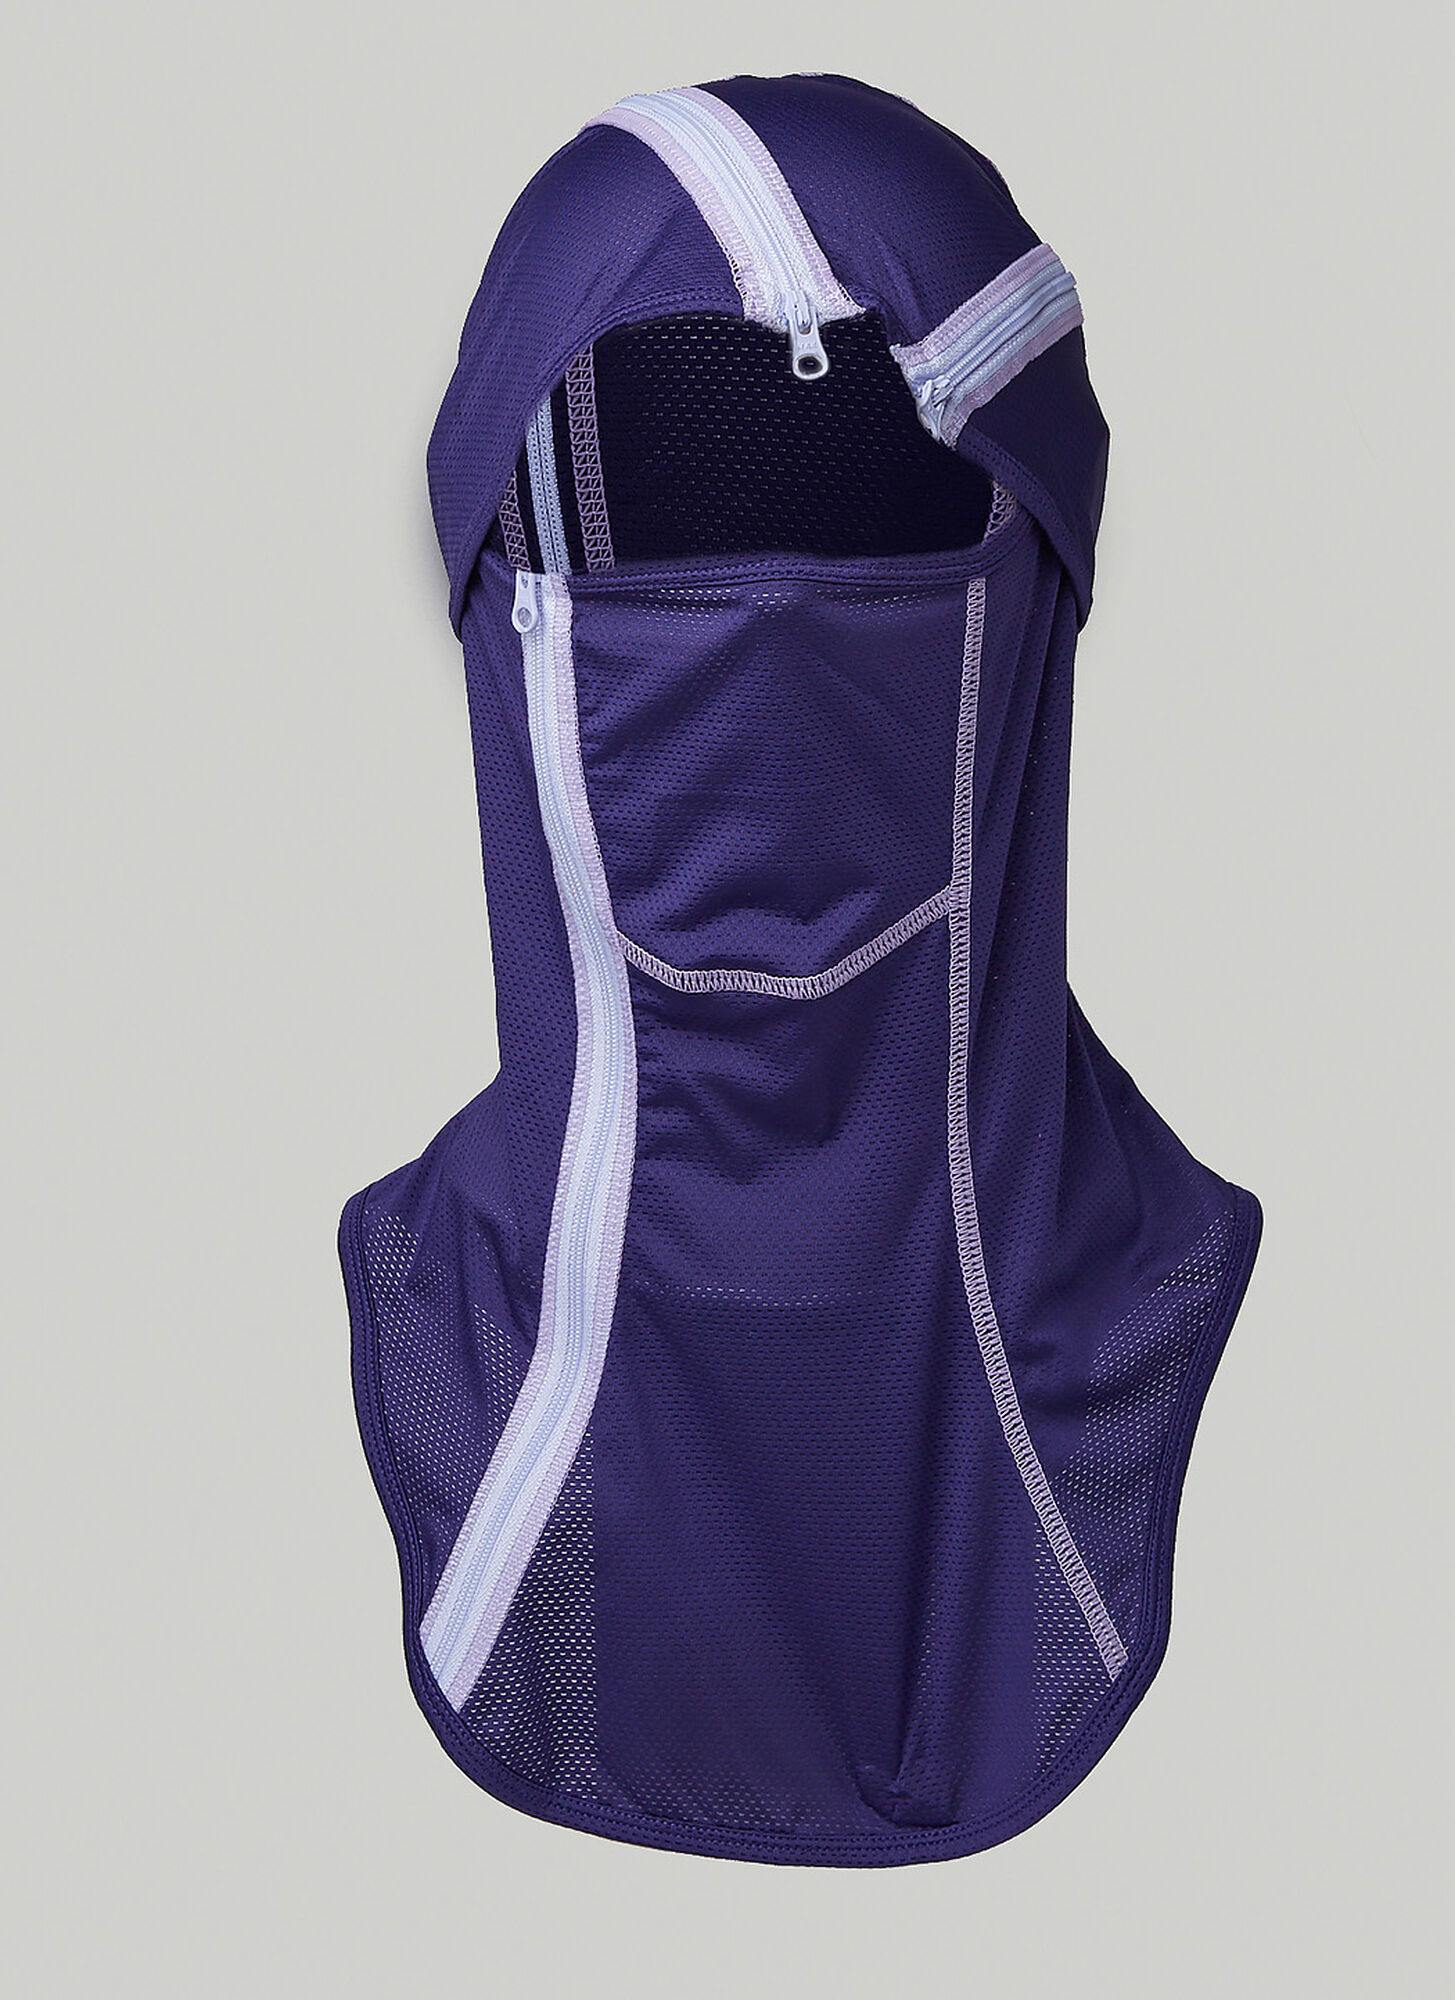 Post Archive Faction (paf) 5.0 Zip Balaclava In Purple